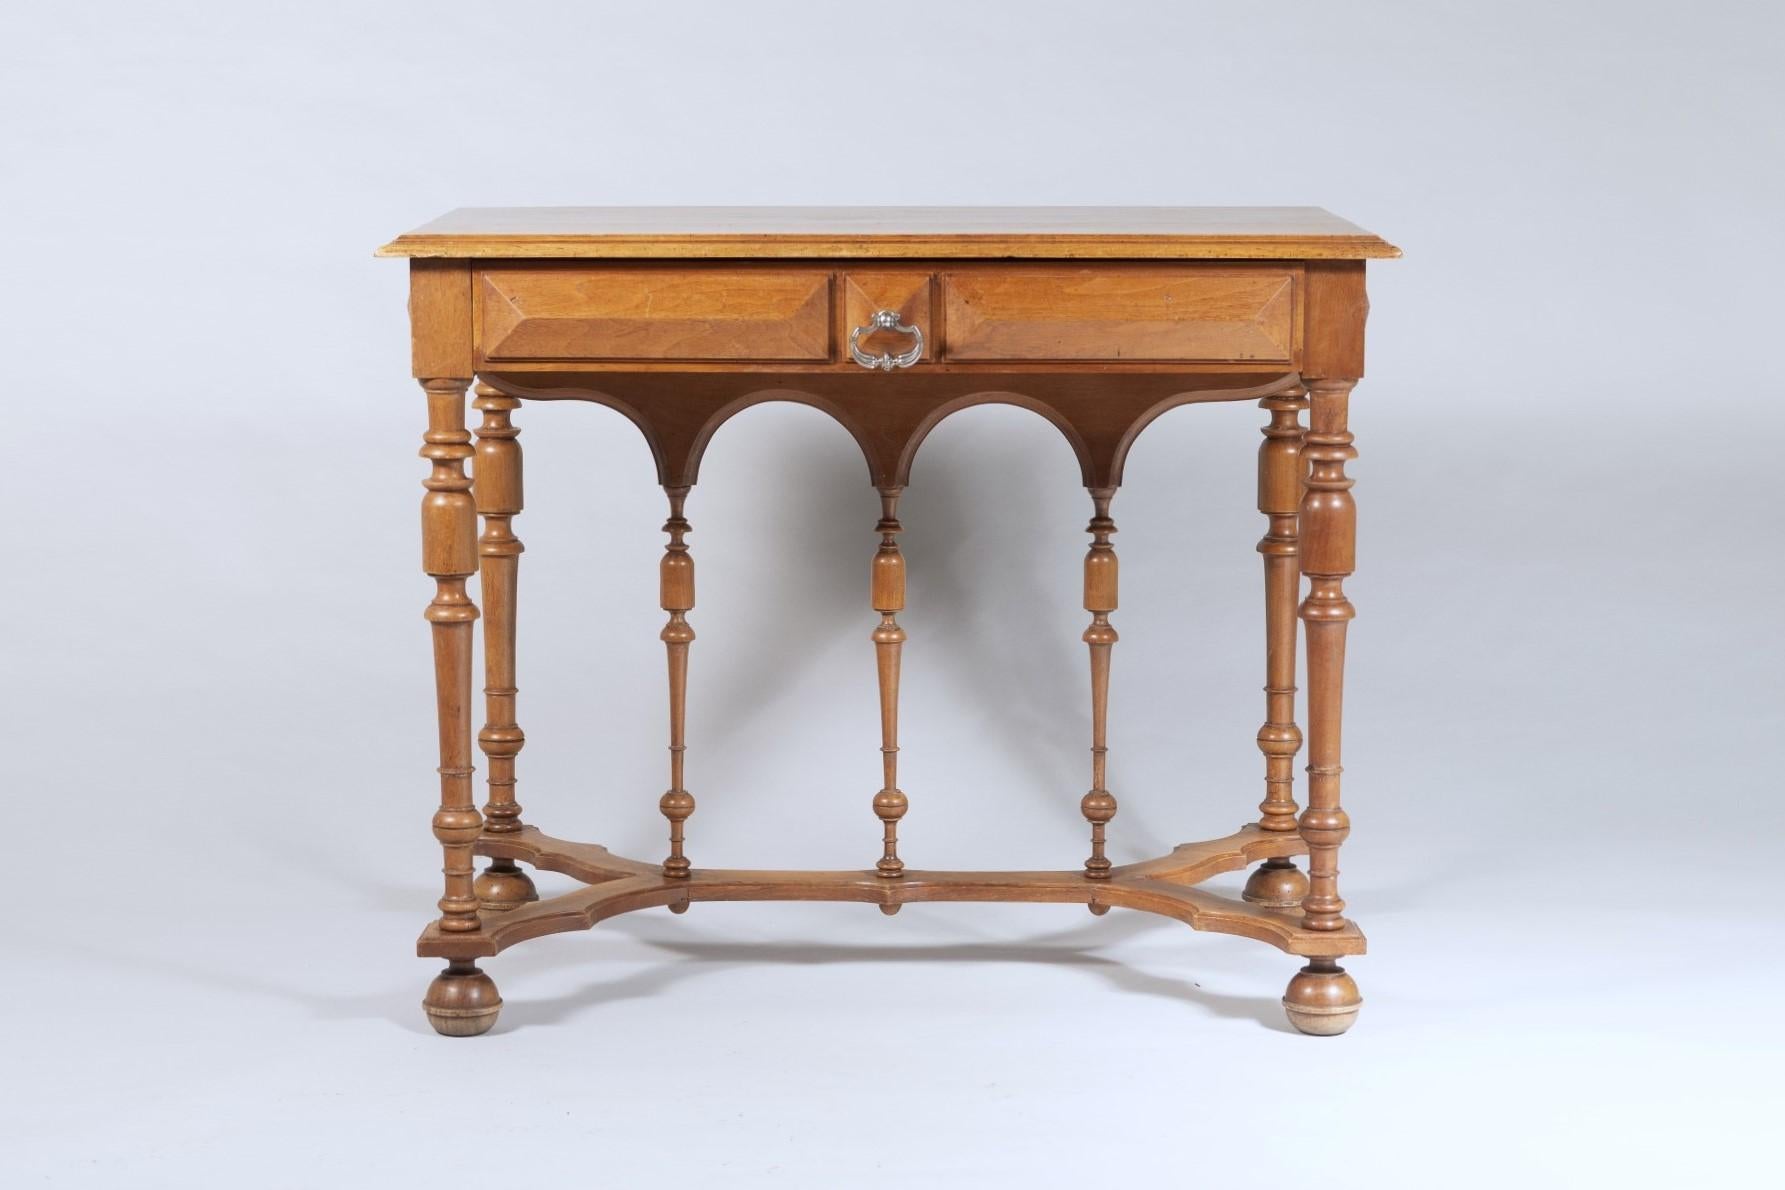 A highly decorative 19th Century Walnut Side Table with Frieze Drawer.
The table displays some wonderful craftsmanship, with geometric panelling to the frieze, four baluster shaped legs and matching decorative supports on sculpted cross stretcher. 